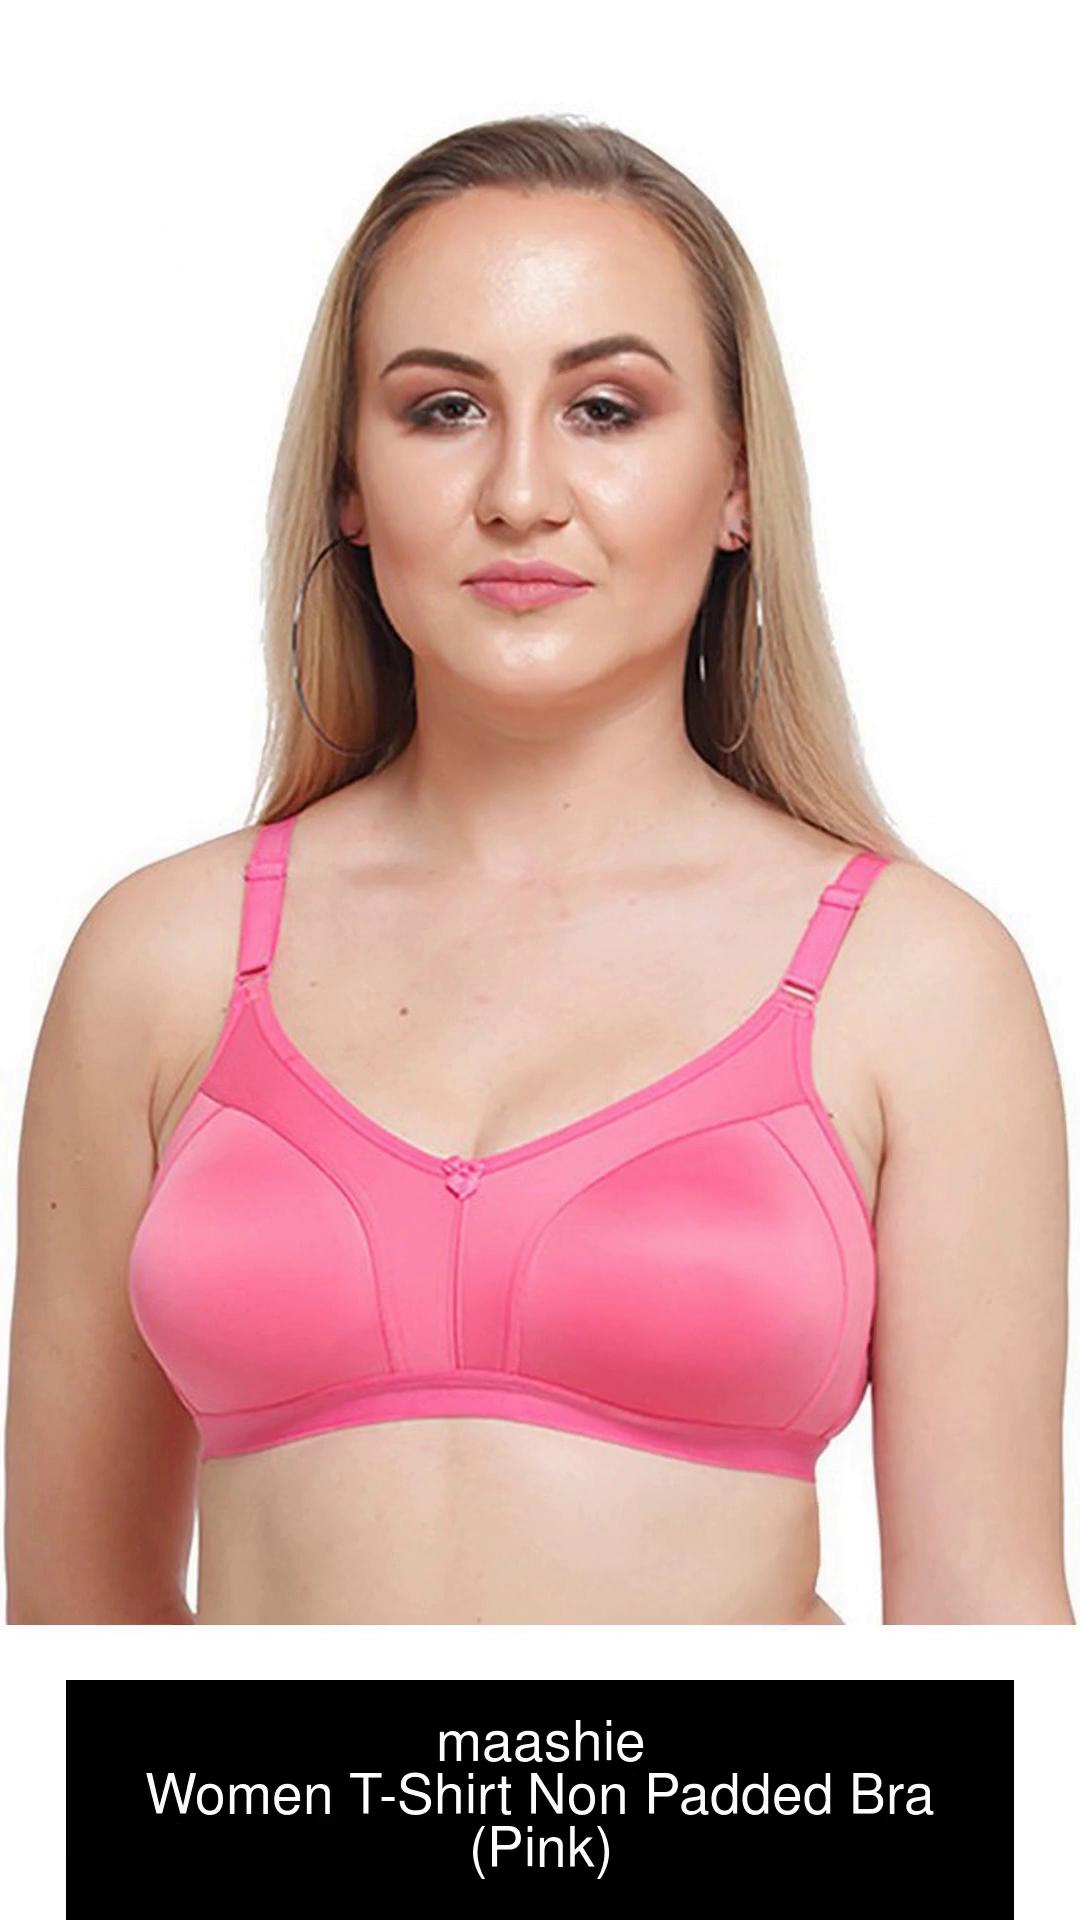 Maashie Bra in Basti - Dealers, Manufacturers & Suppliers - Justdial